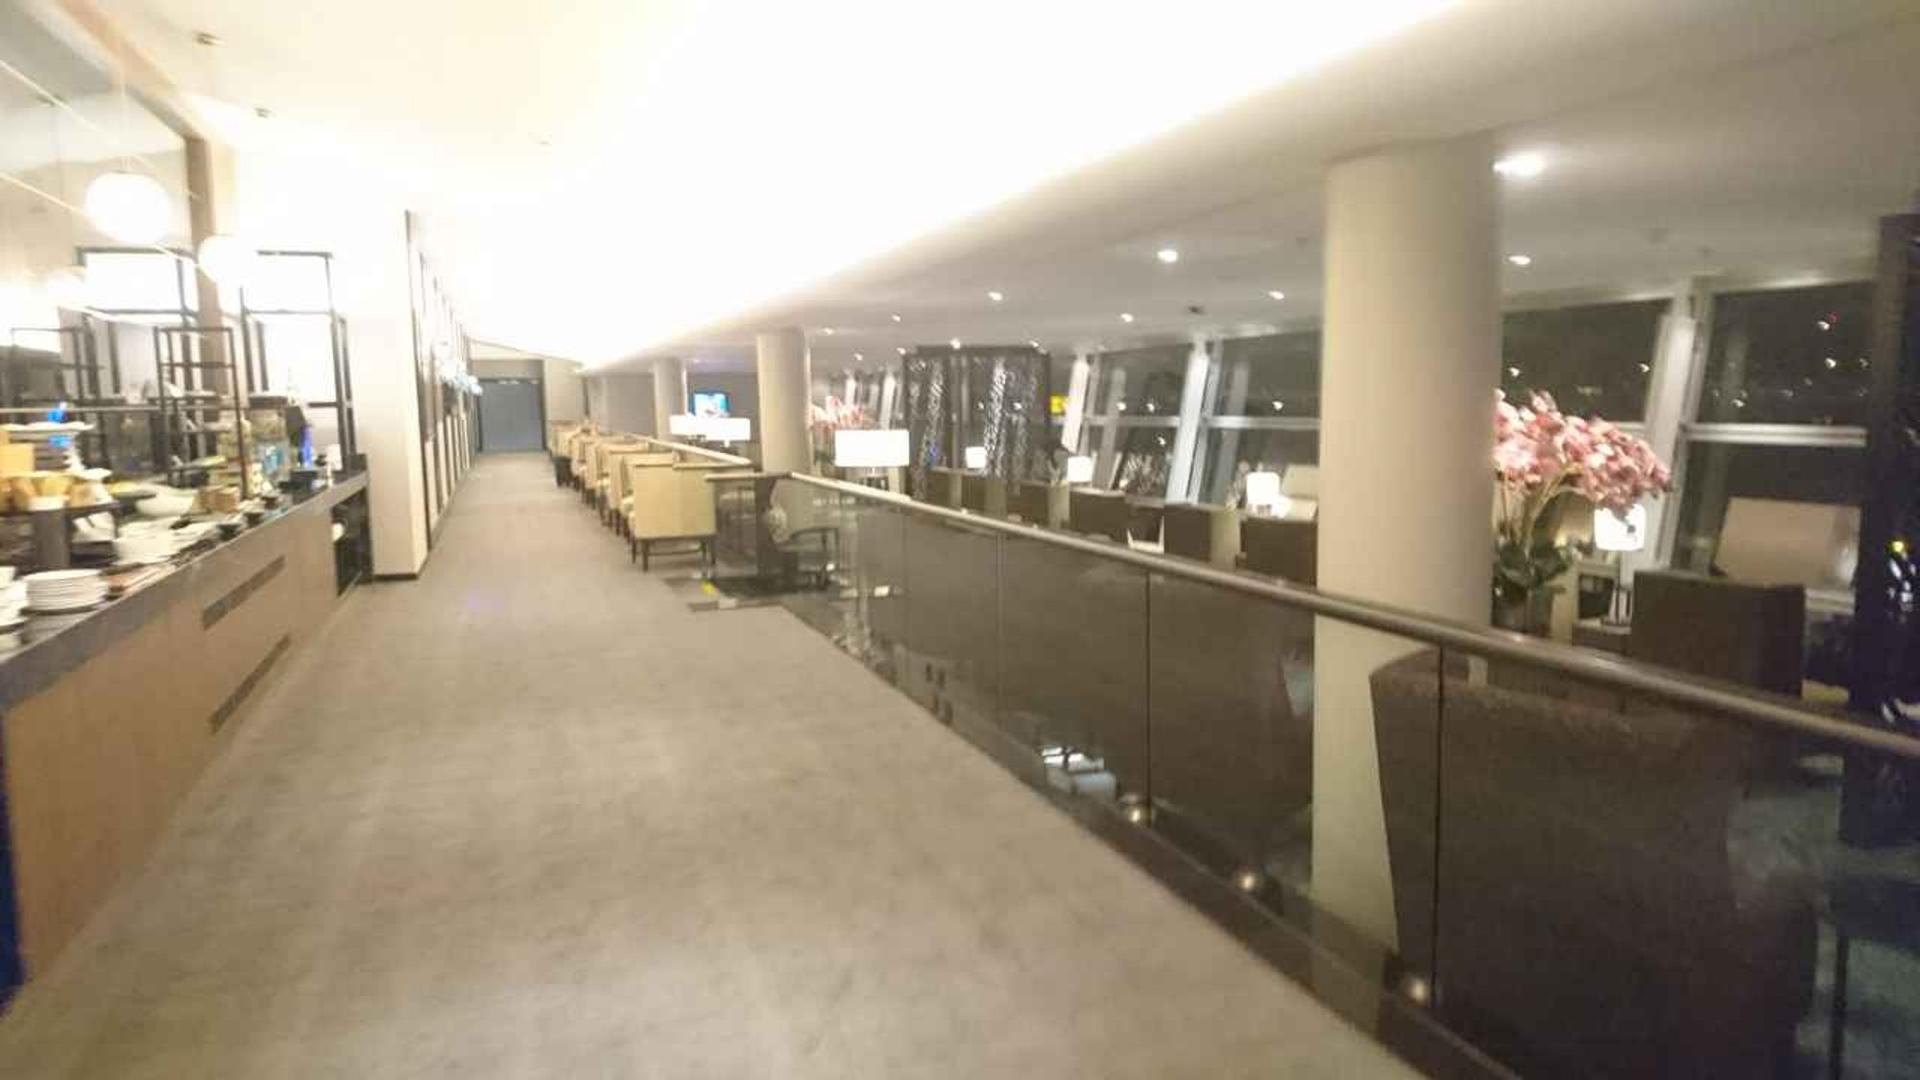 Malaysia Airlines Platinum Lounge image 9 of 26